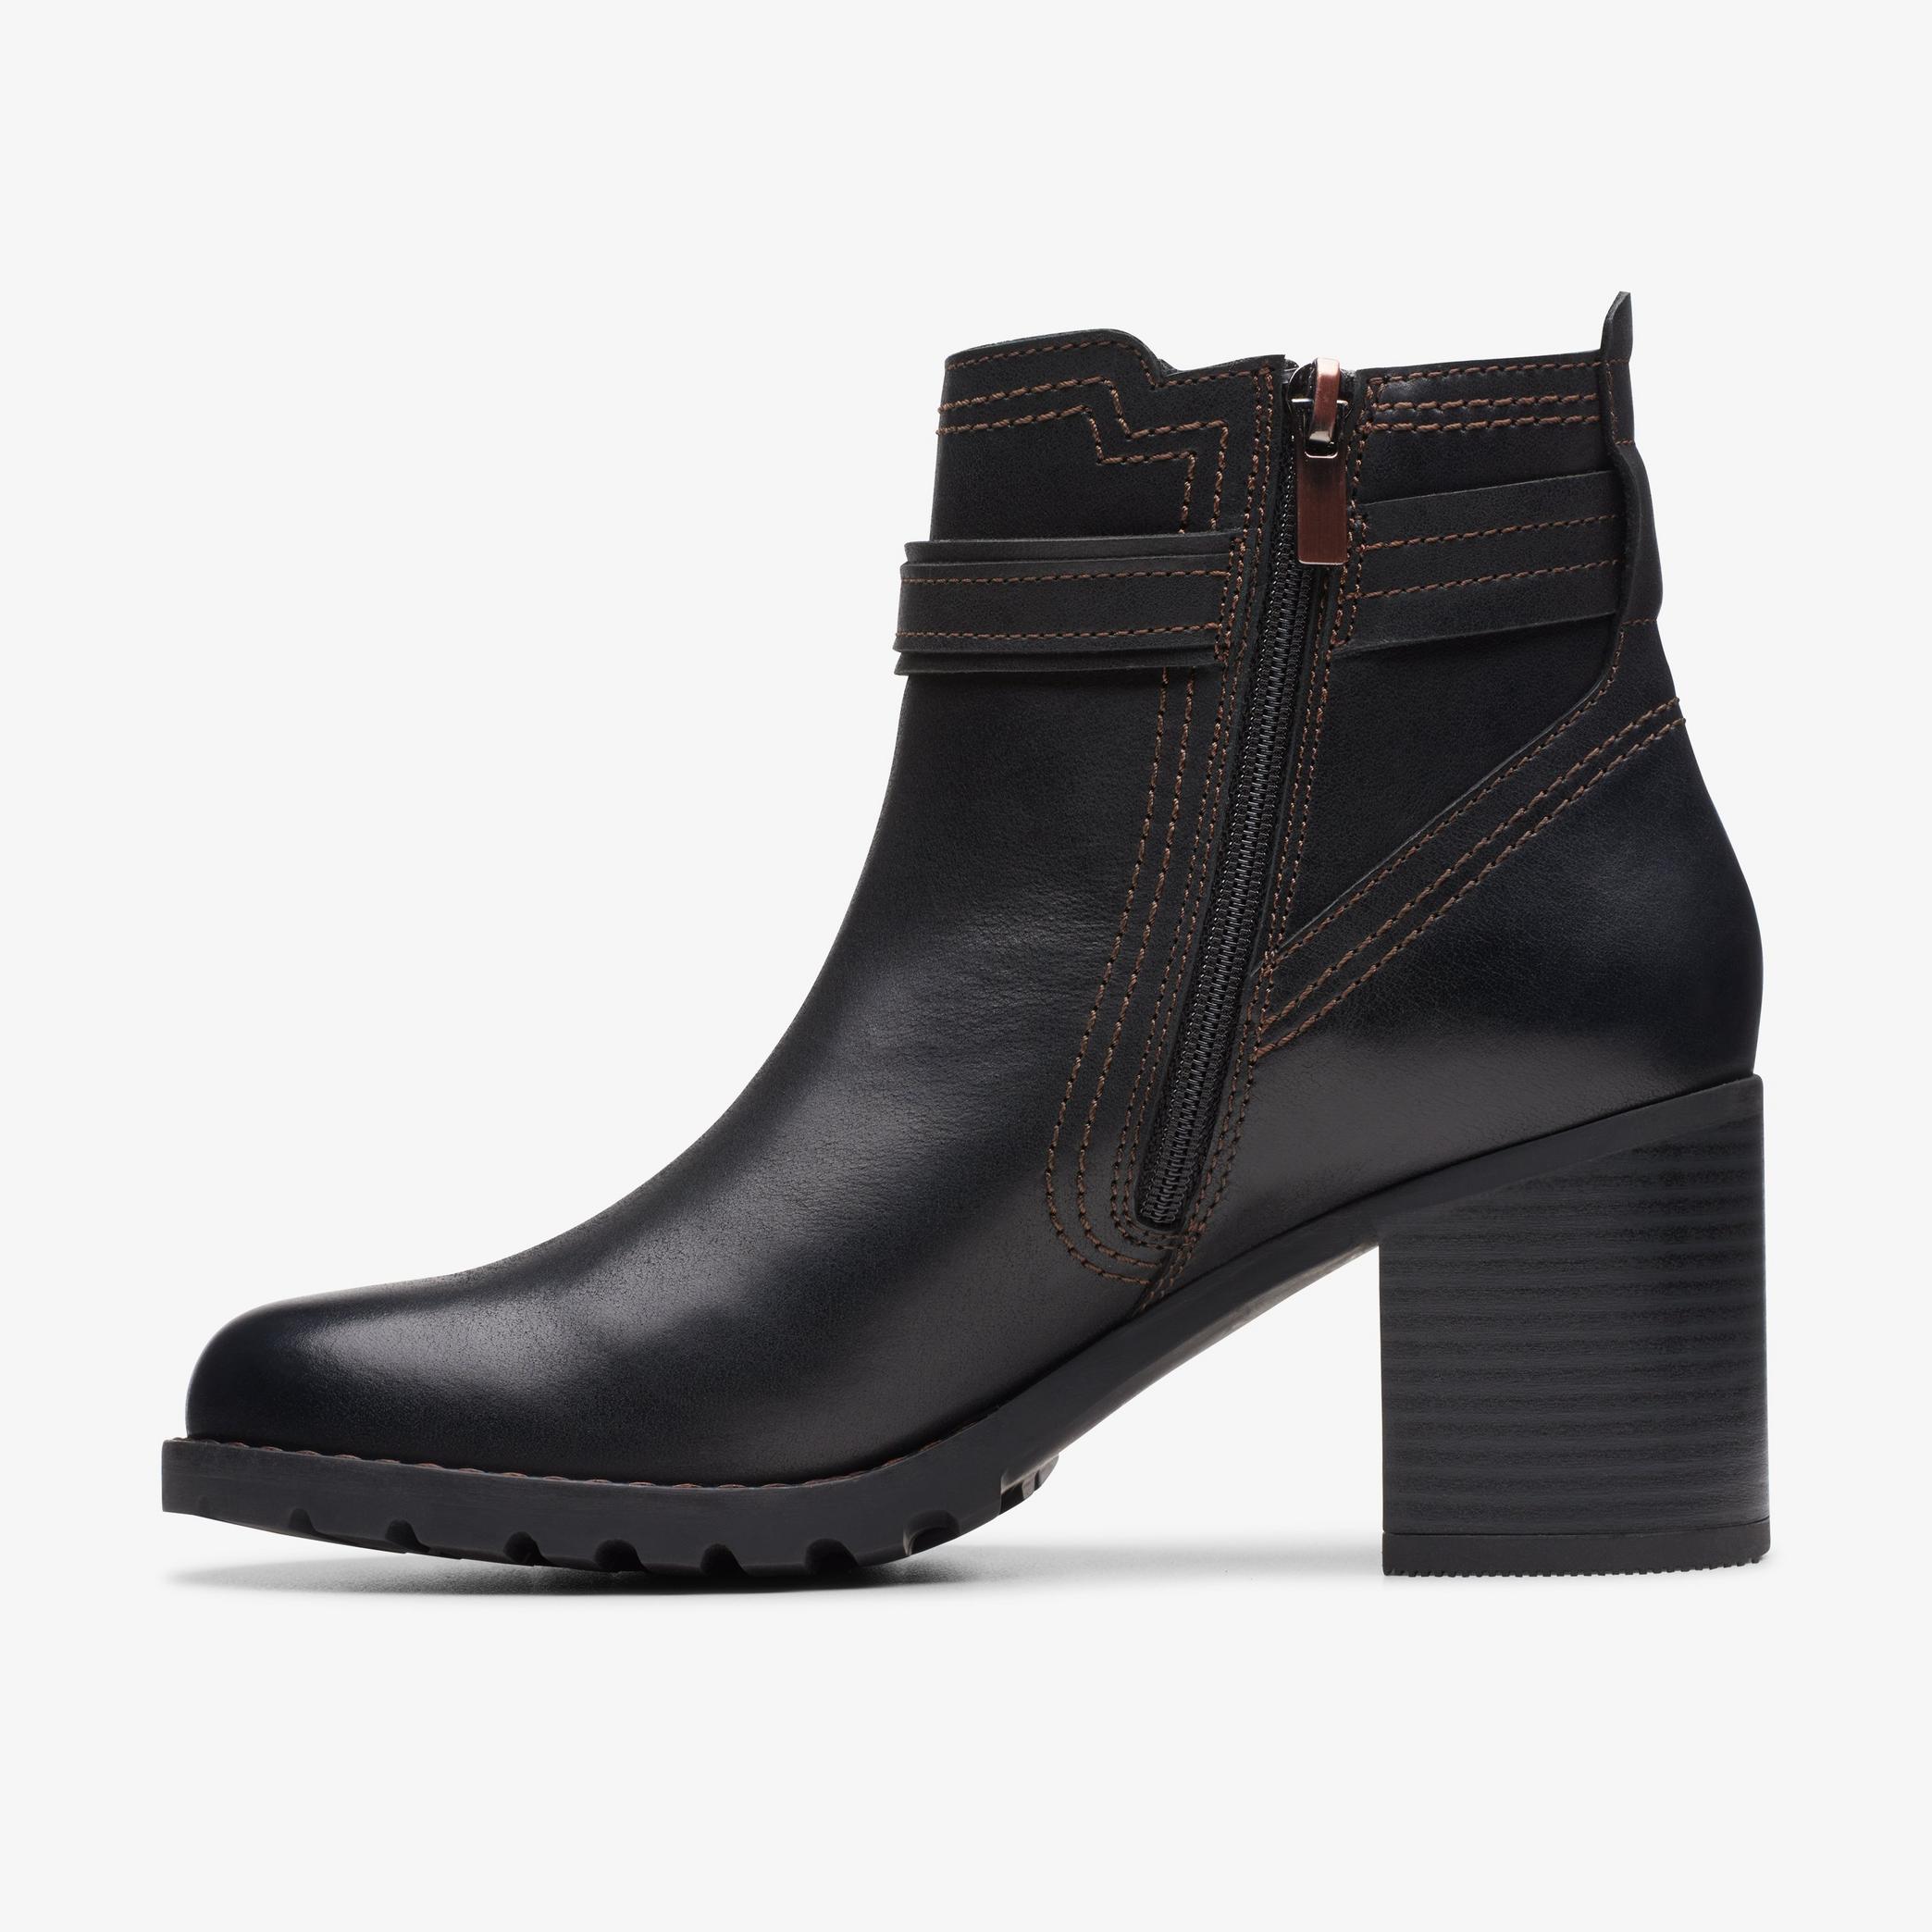 Leda Strap Black Leather Ankle Boots, view 3 of 7